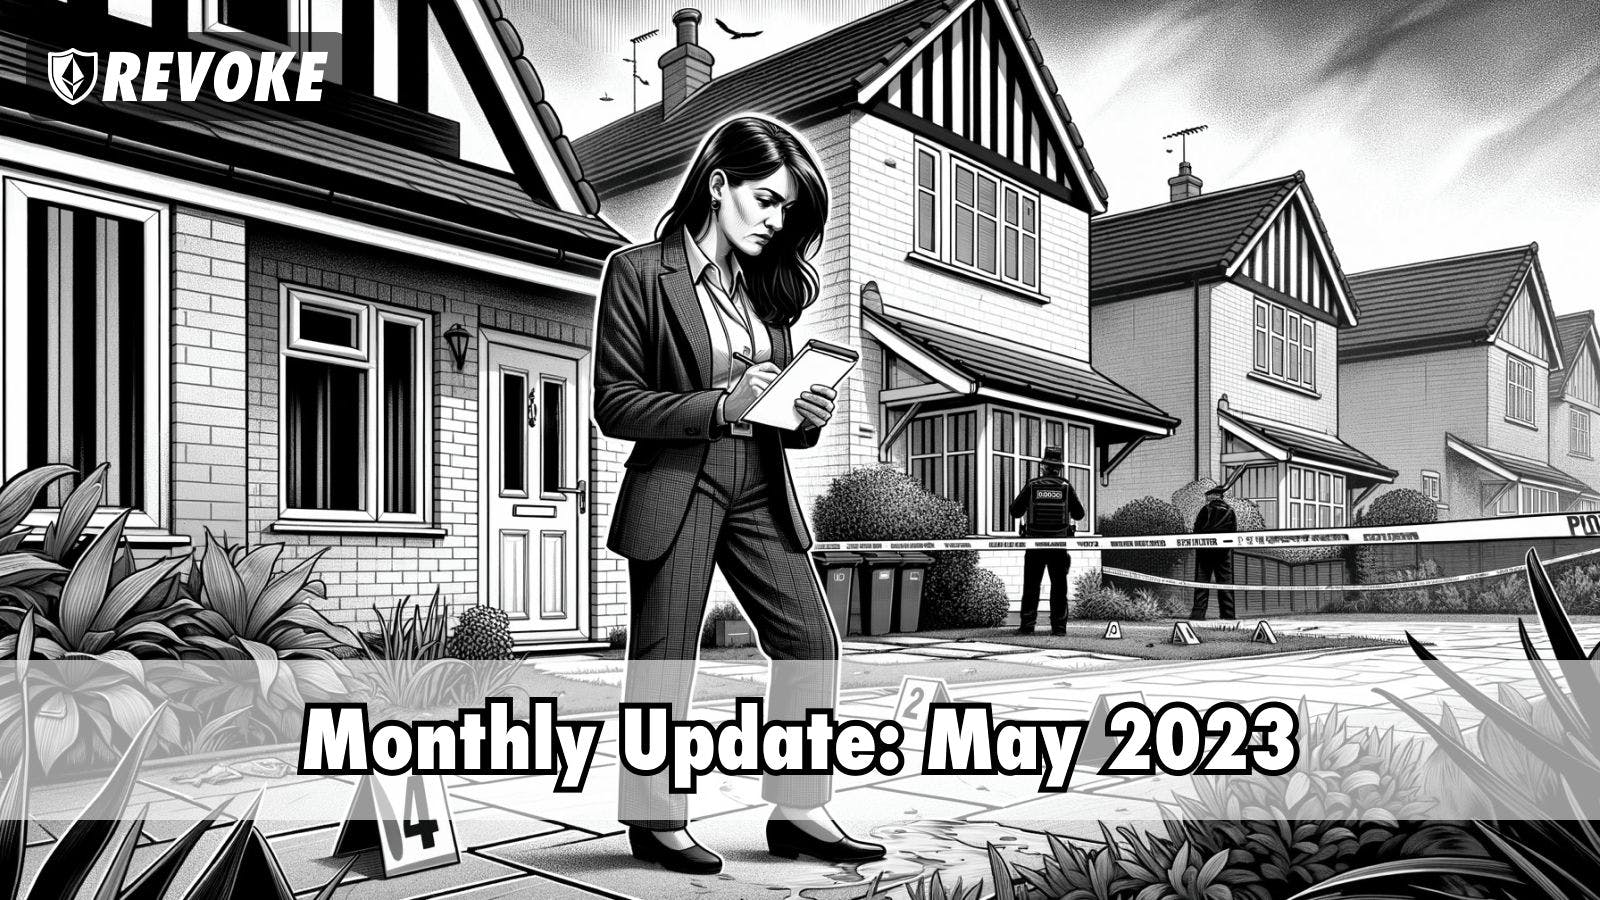 Monthly Update: May 2023 Cover Image